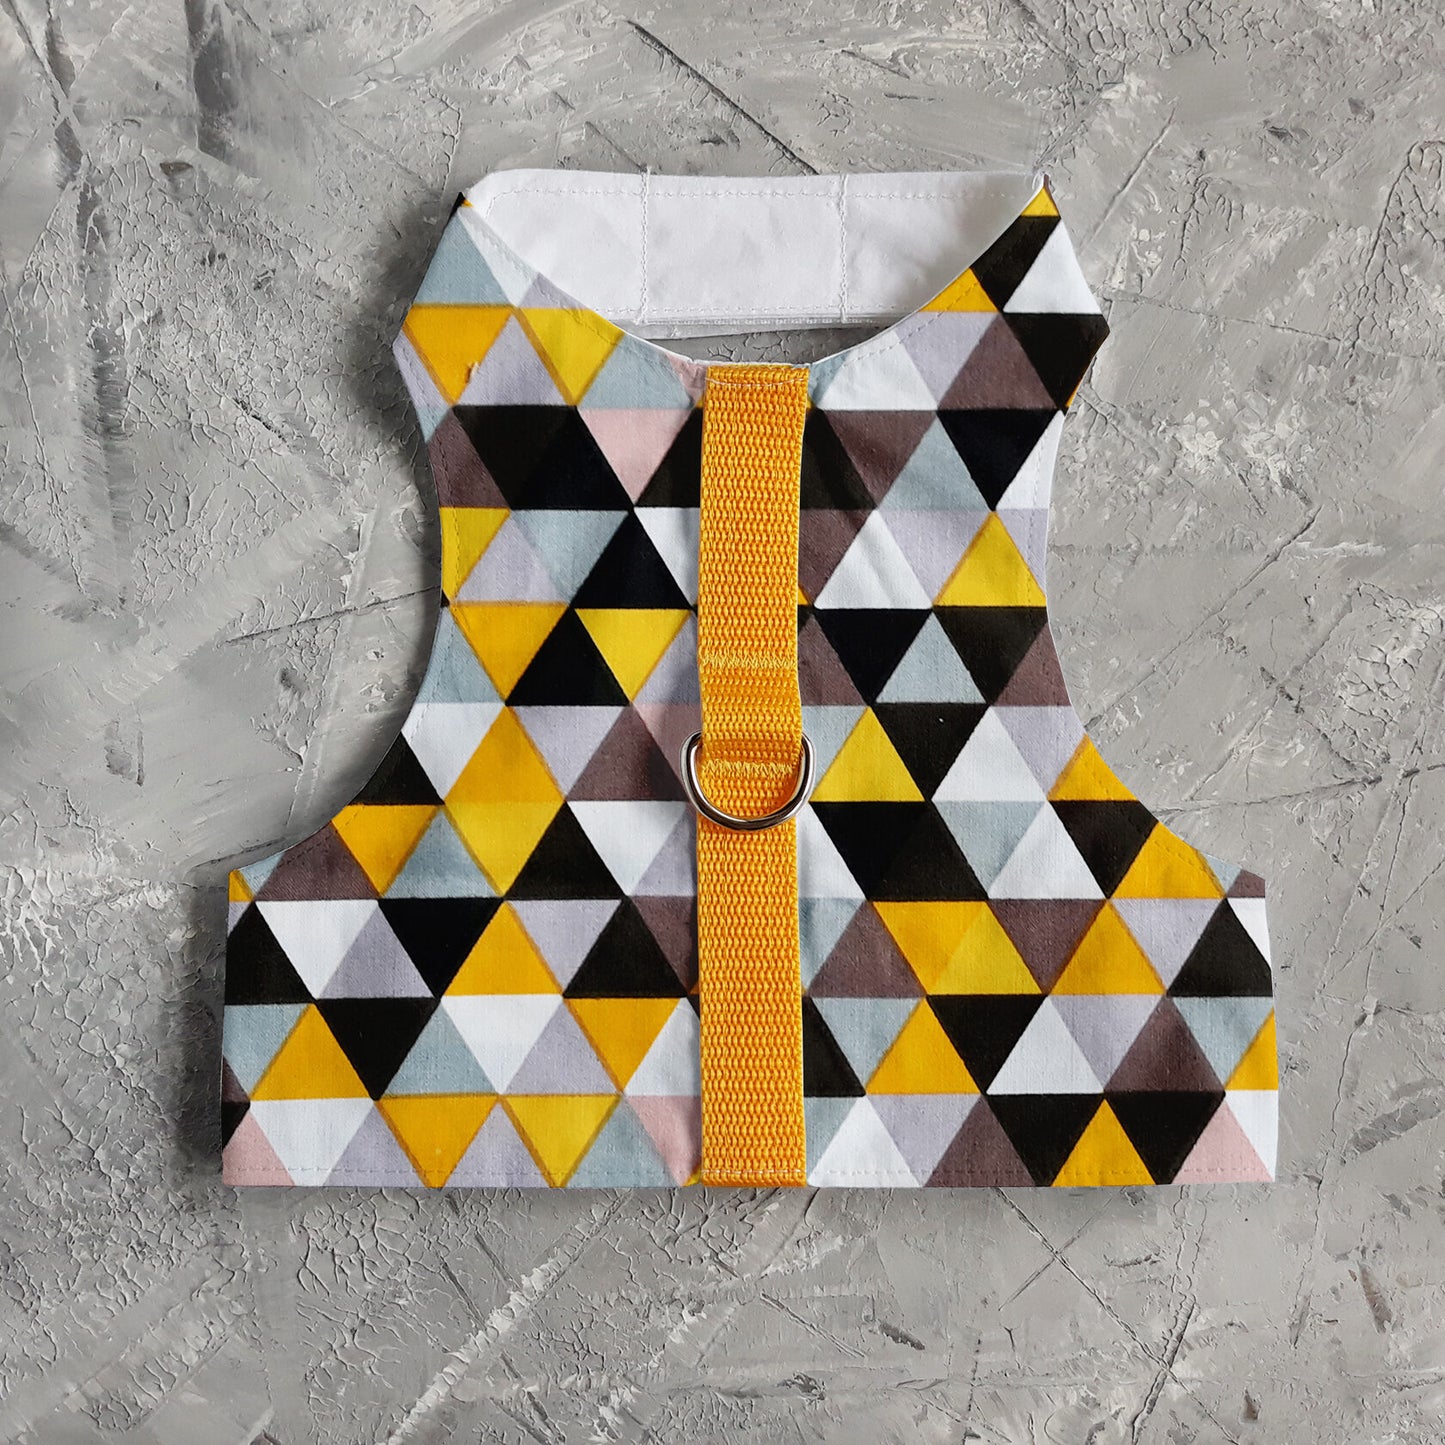 Difficult to escape and safety cat harness. Breathable cotton vest with yellow triangles print